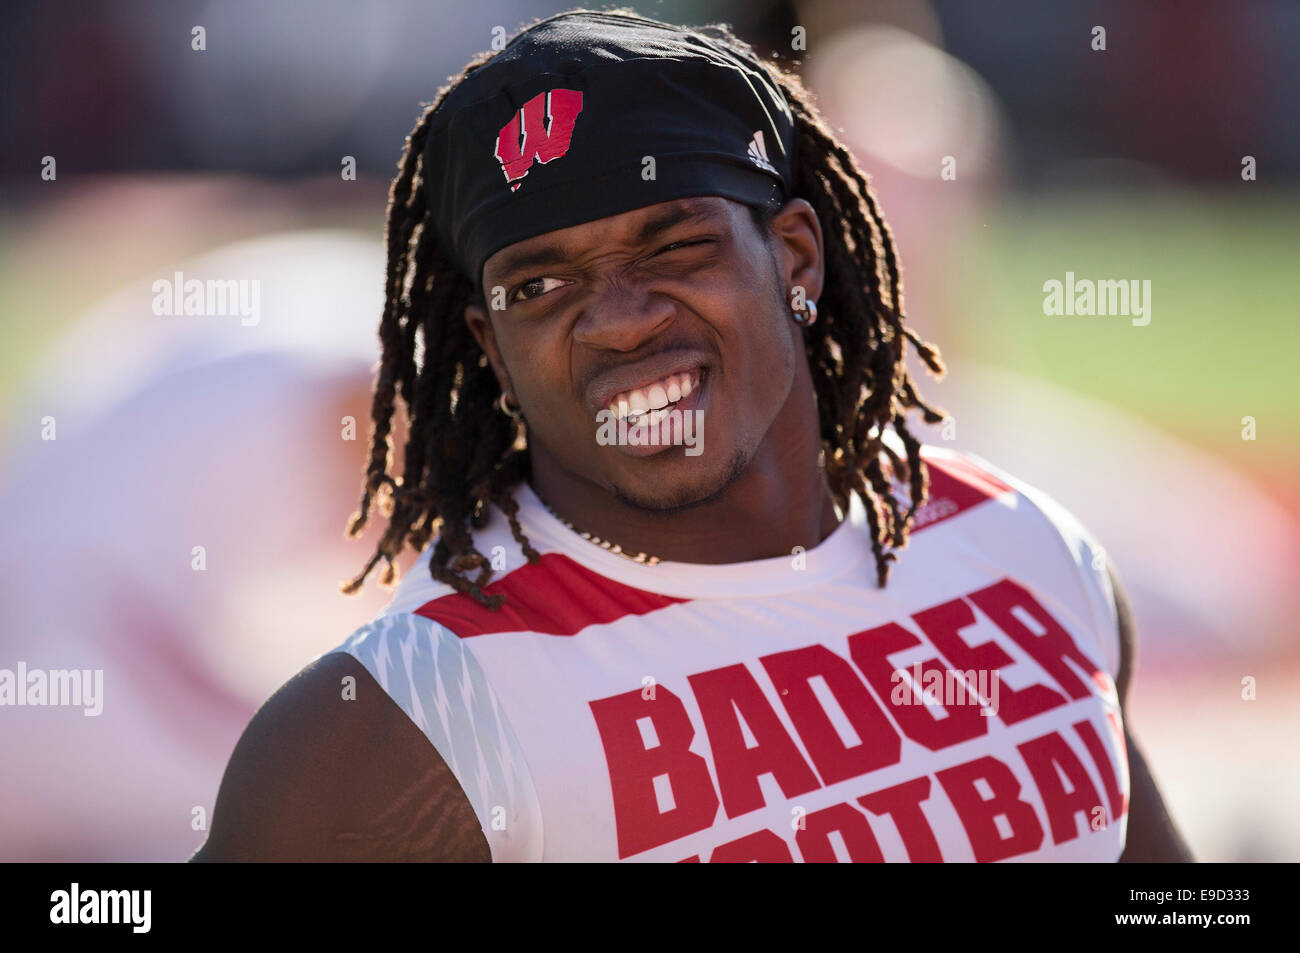 Madison, WI, USA. 25th Oct, 2014. Wisconsin Badgers running back Melvin Gordon #25 gets ready to take on the Maryland Terrapins at Camp Randall Stadium in Madison, WI. John Fisher/CSM/Alamy Live News Stock Photo